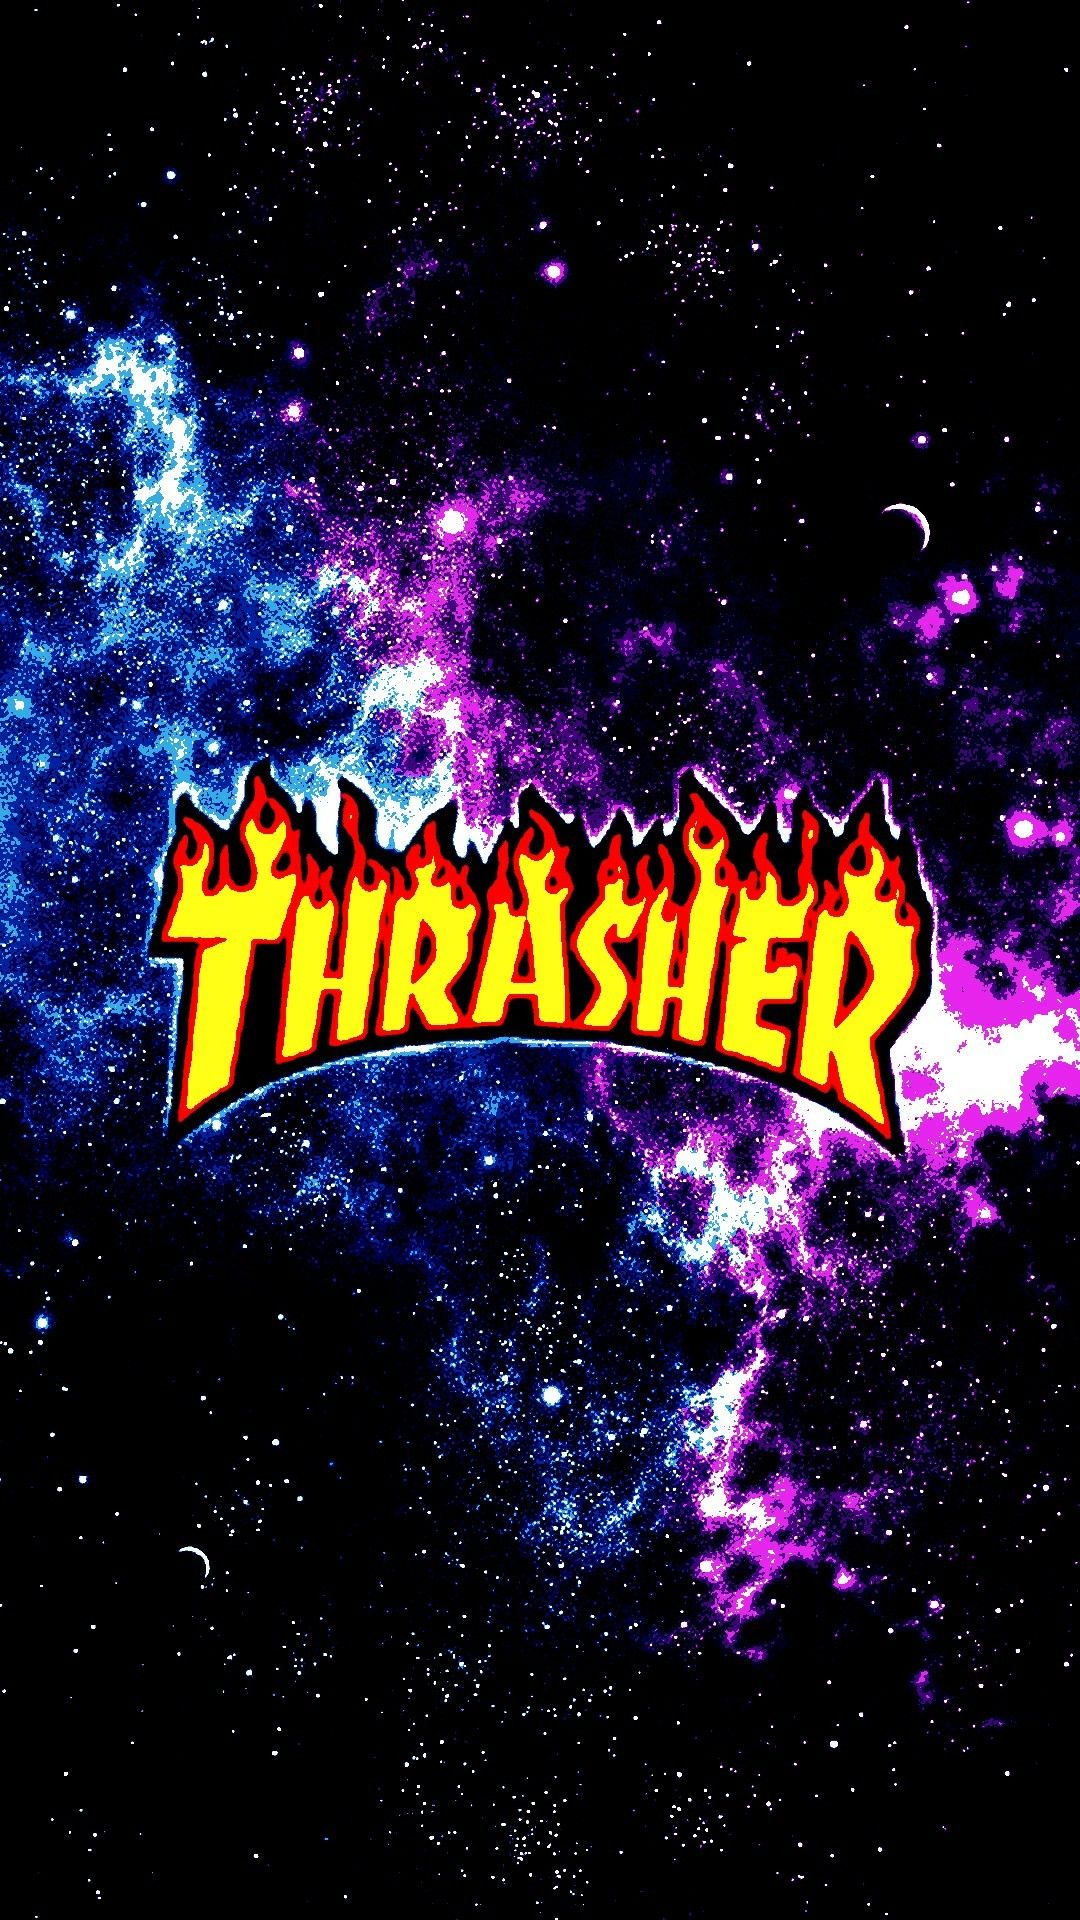 Galaxy Thrasher I actually have this my background on my phone